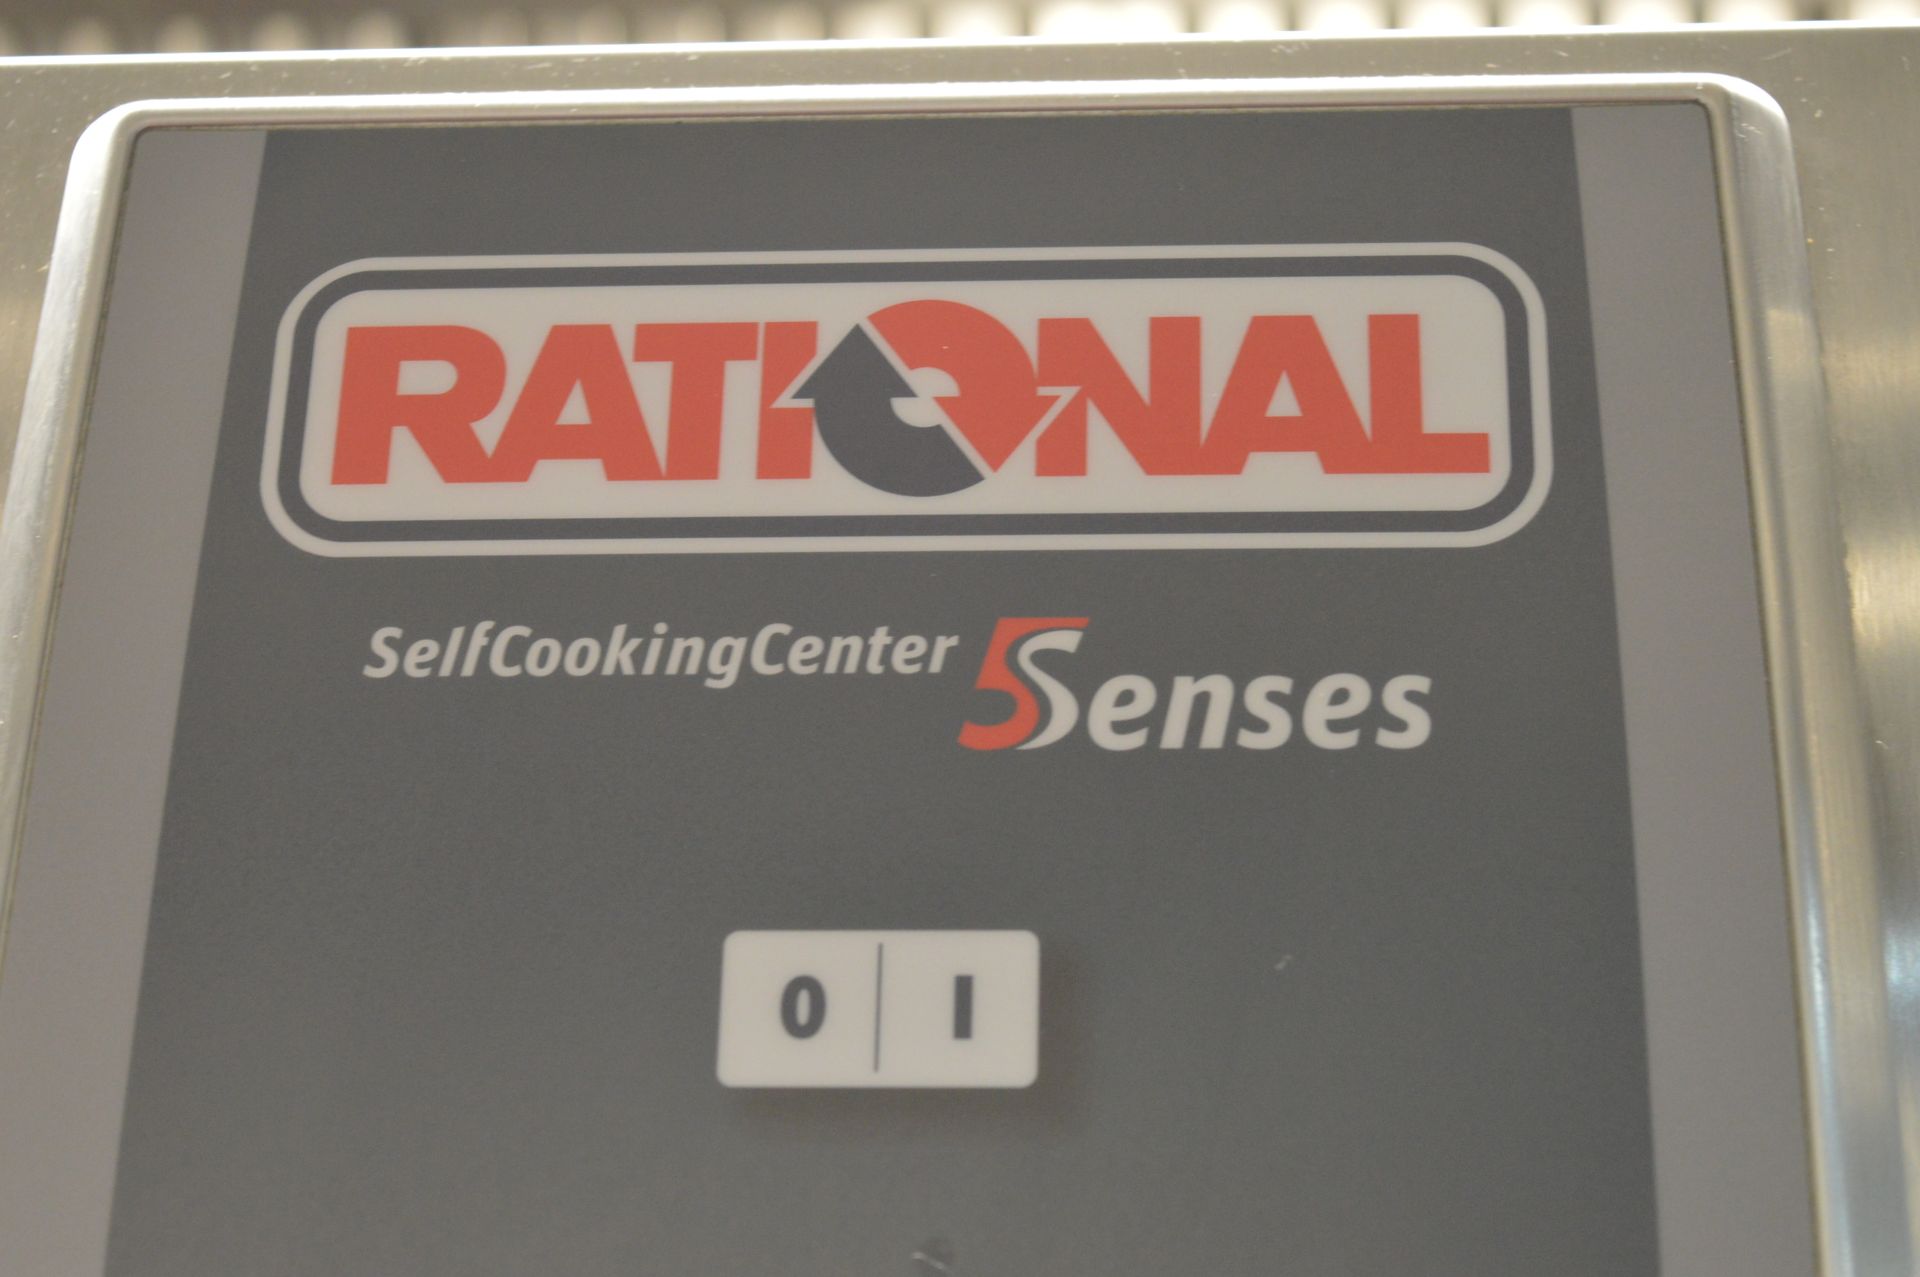 2 x Rational SCC WE 61G Gas Combination Ovens - Perfect For Hotels, Restaurants, Delis, Hospitals - Image 8 of 15